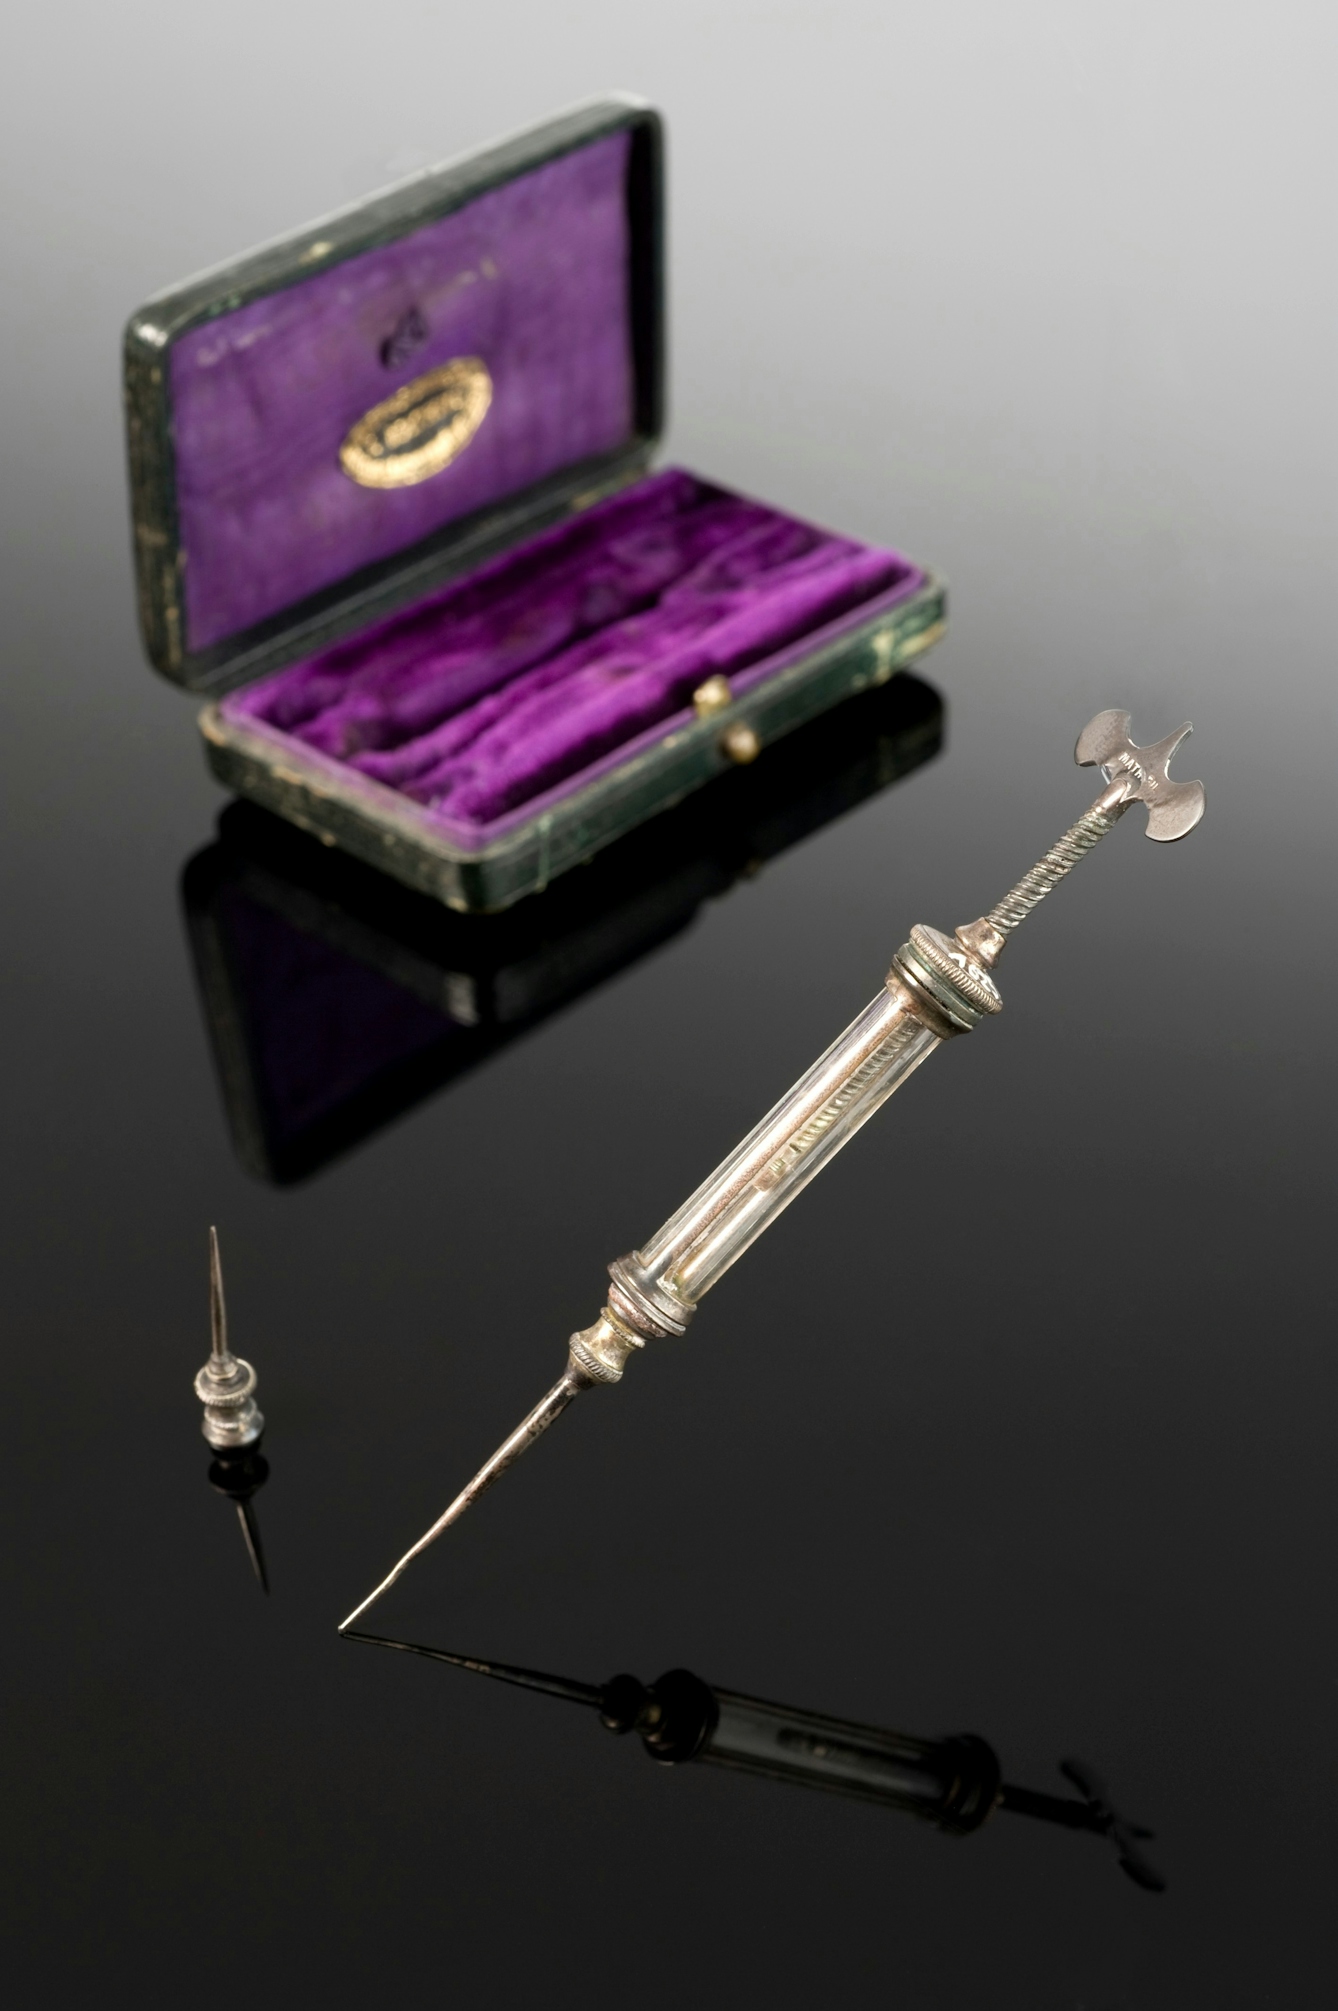 Metal syringe with a spare needle and (in background) a purple-velvet lined case.